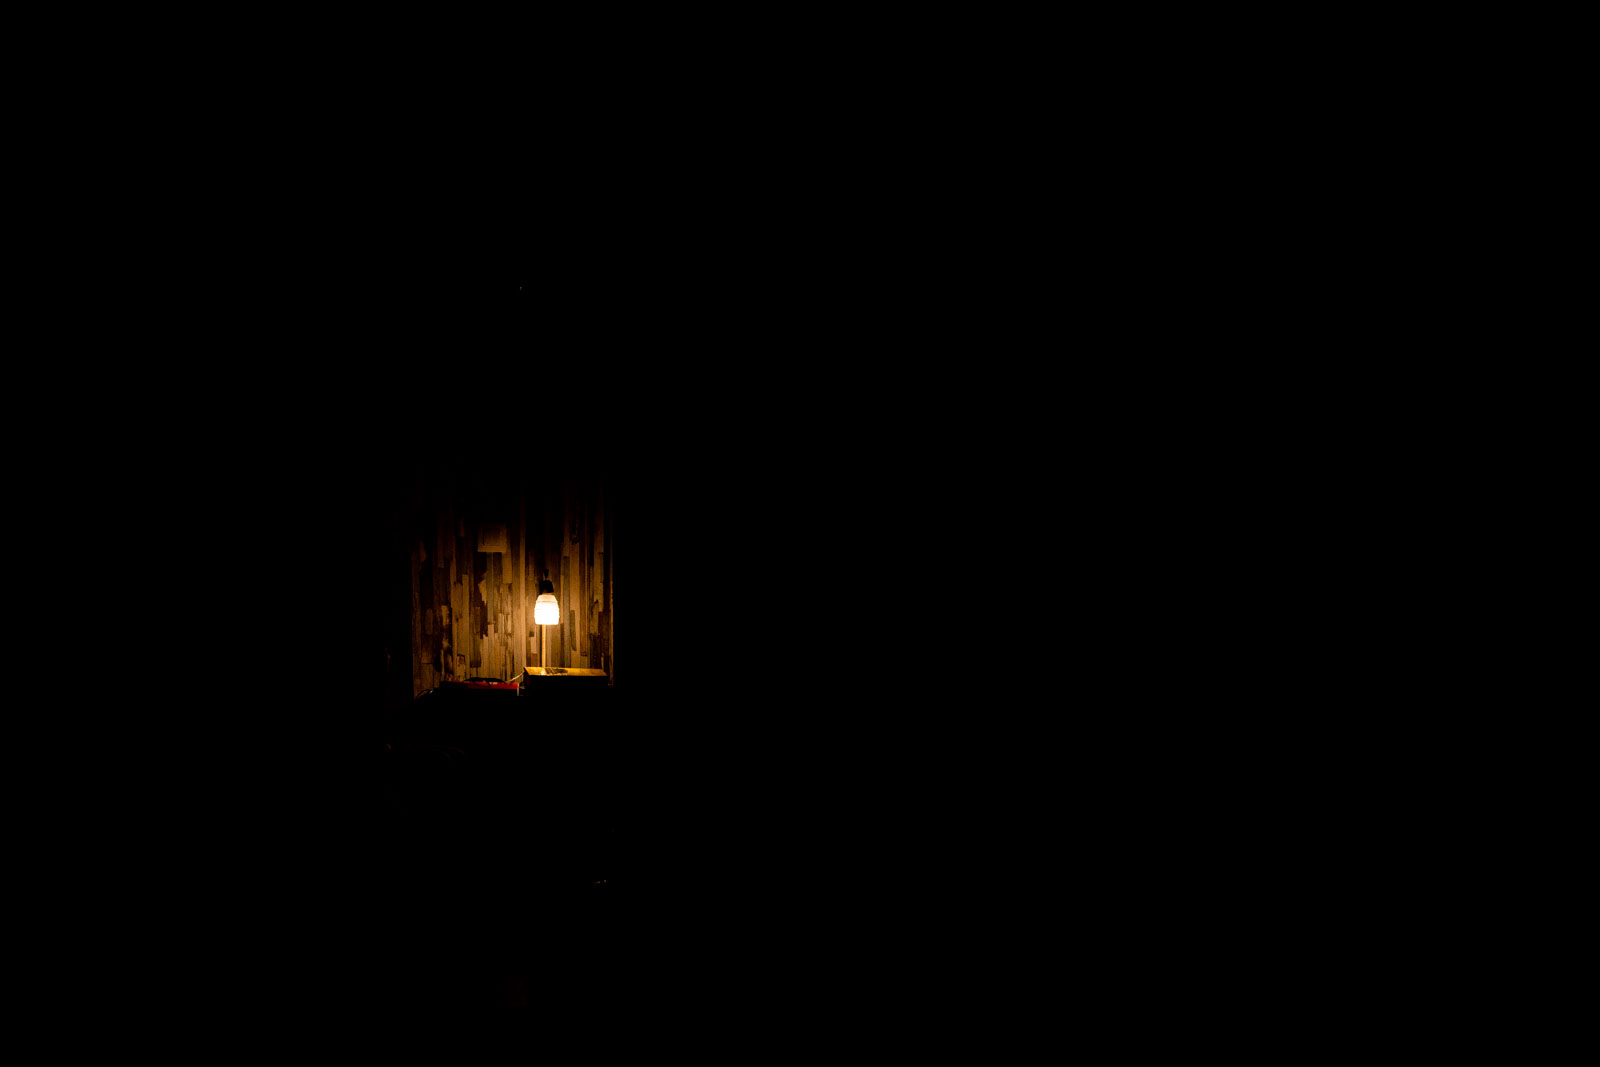 small light shining in the darkness